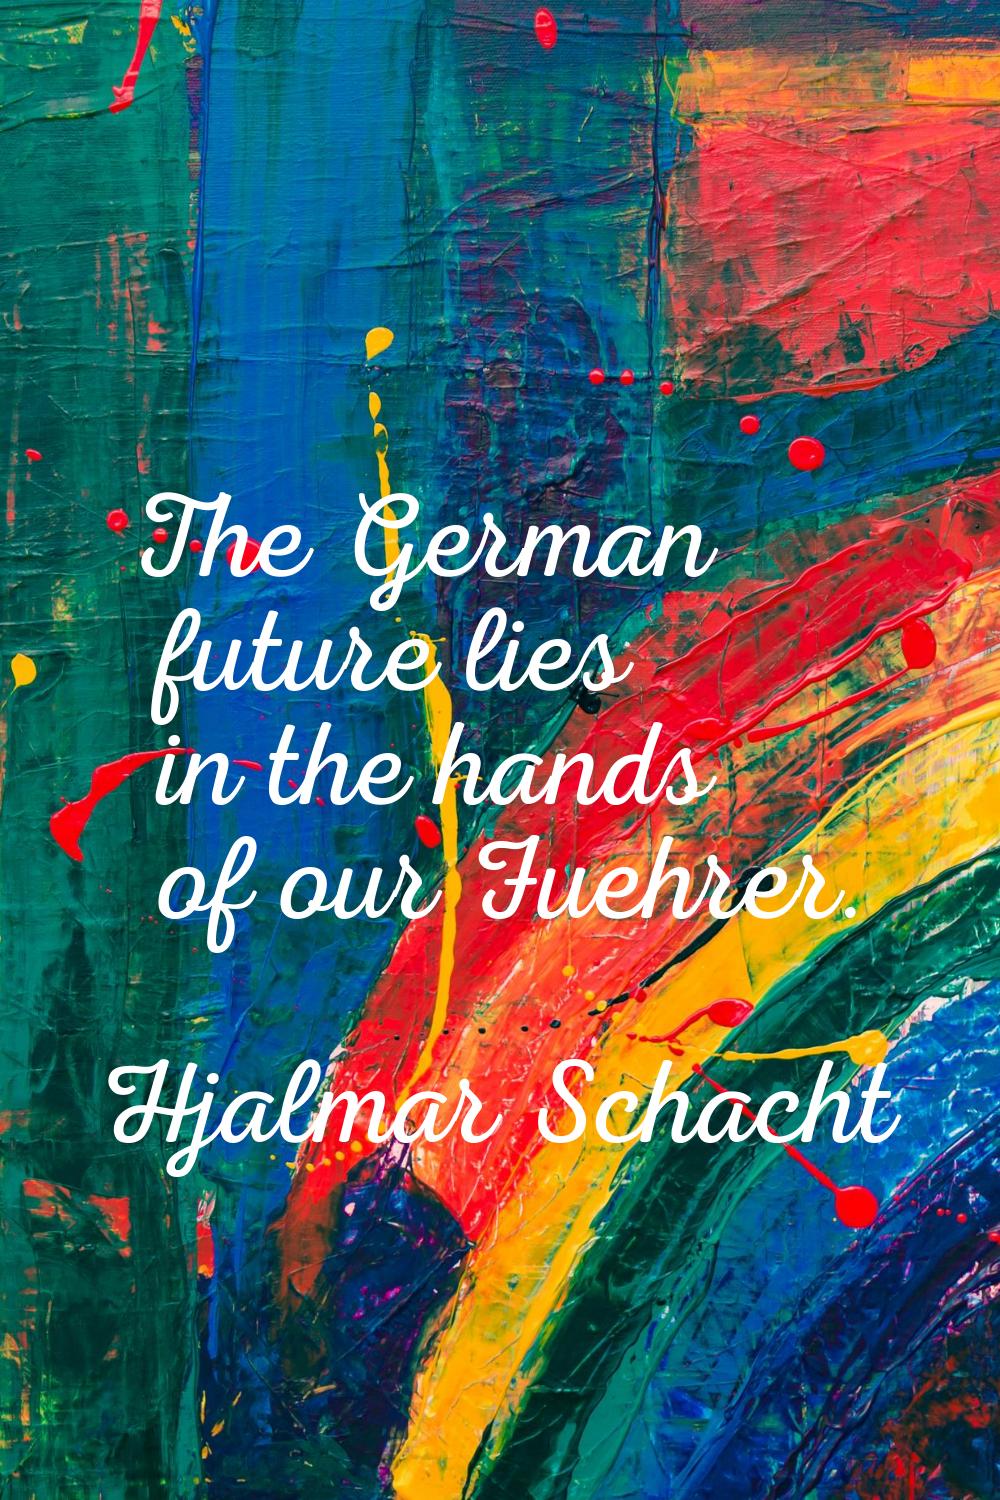 The German future lies in the hands of our Fuehrer.